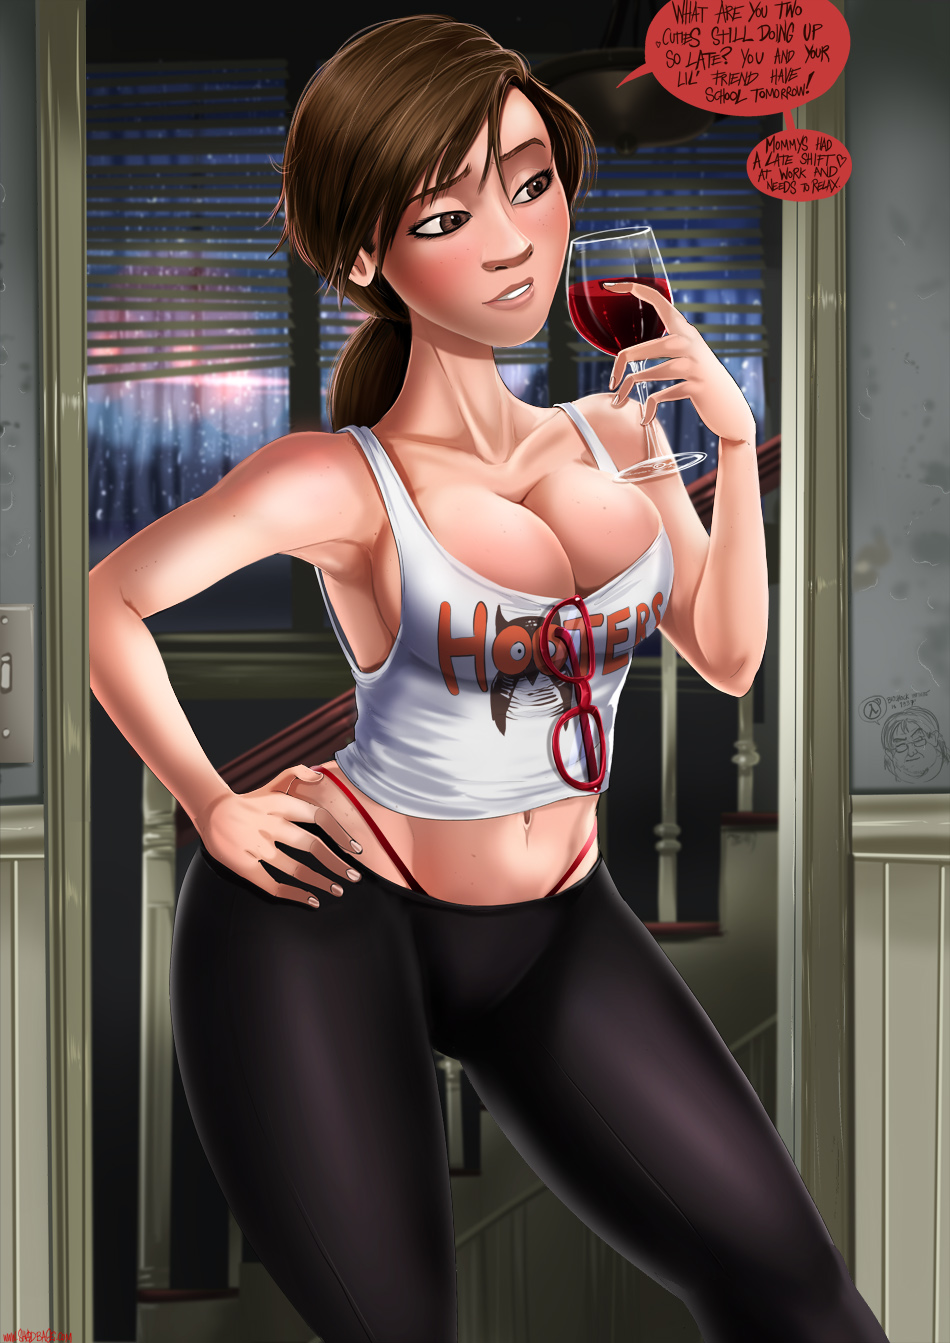 shadman, jill anderson, disney, hooters, inside out, pixar, english text, s...